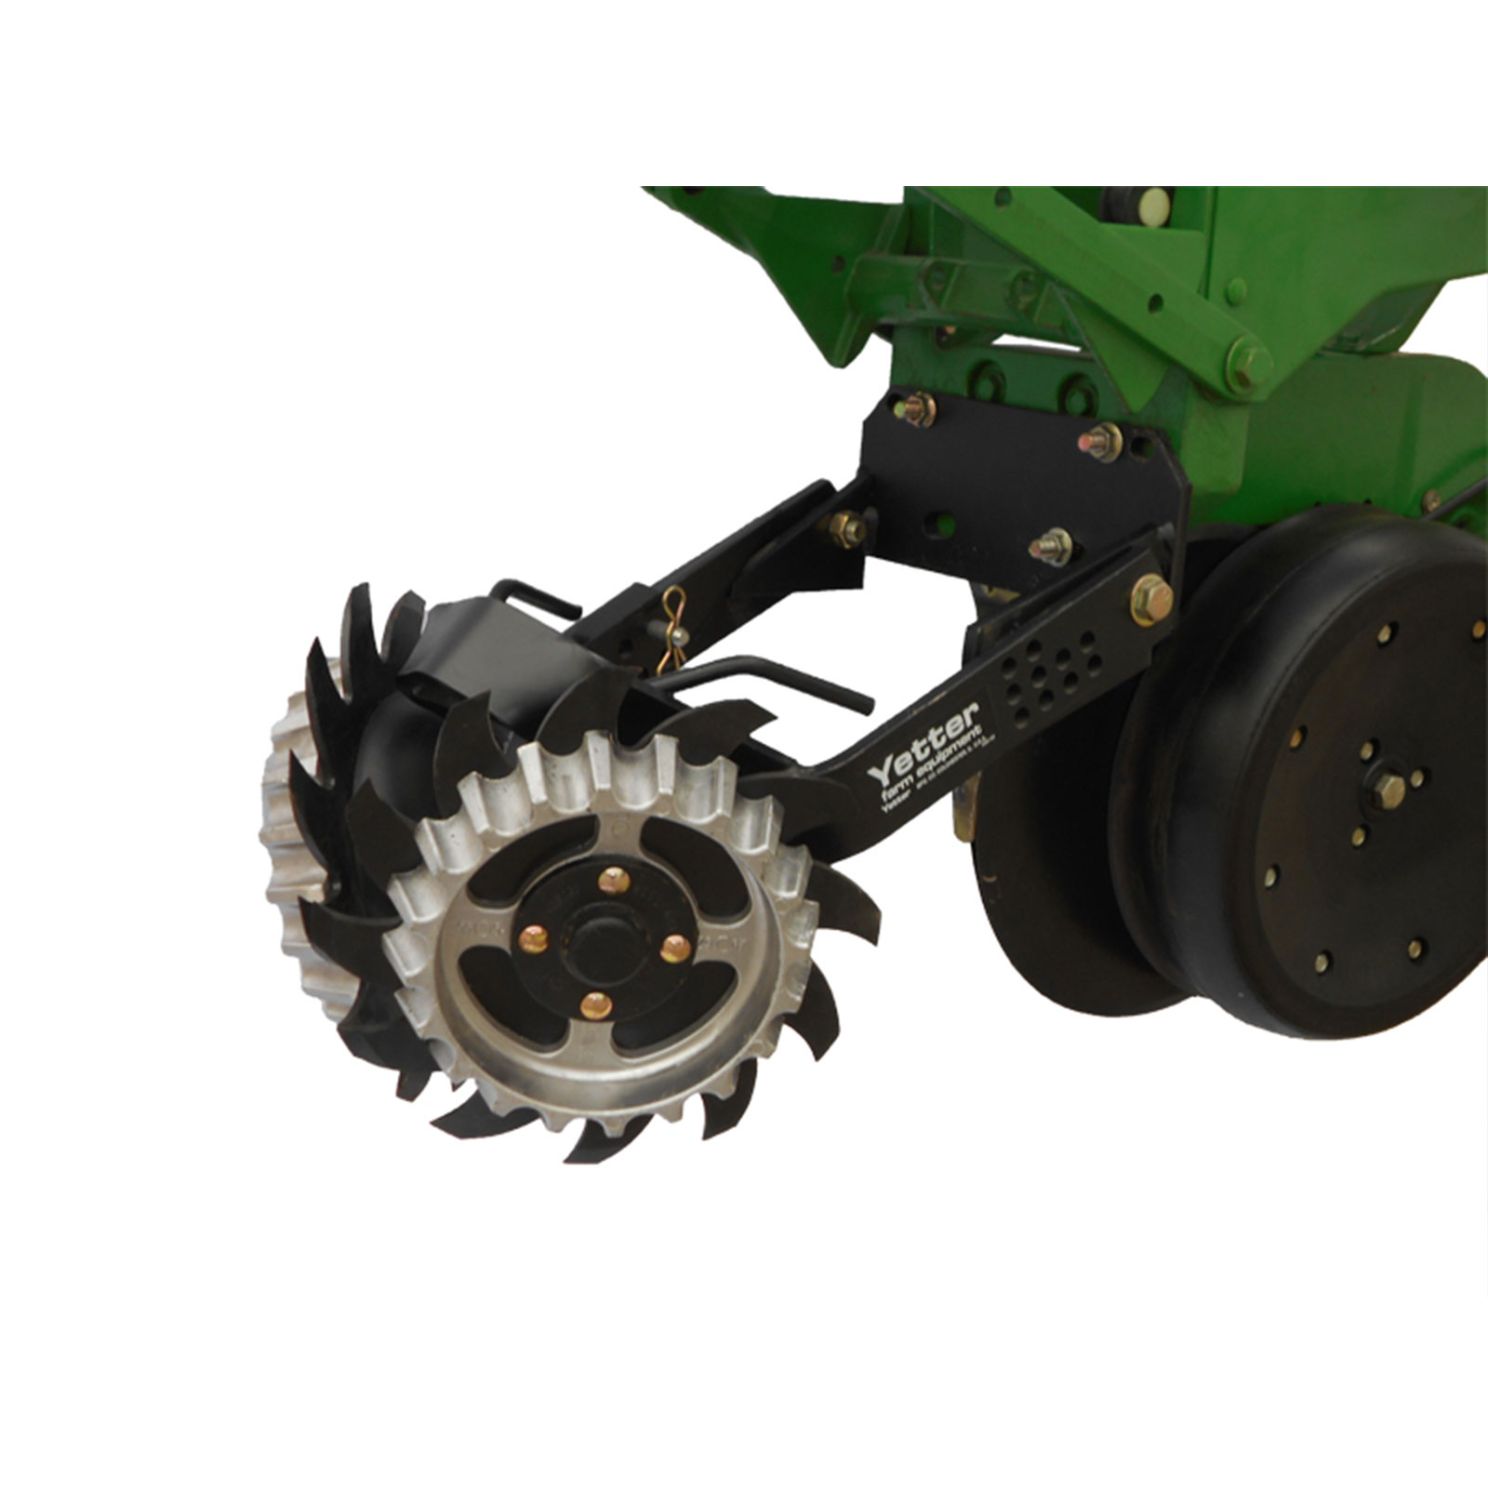 Yetter 2967 Series Planter Titan Residue Manager 2967-035-ST-FW